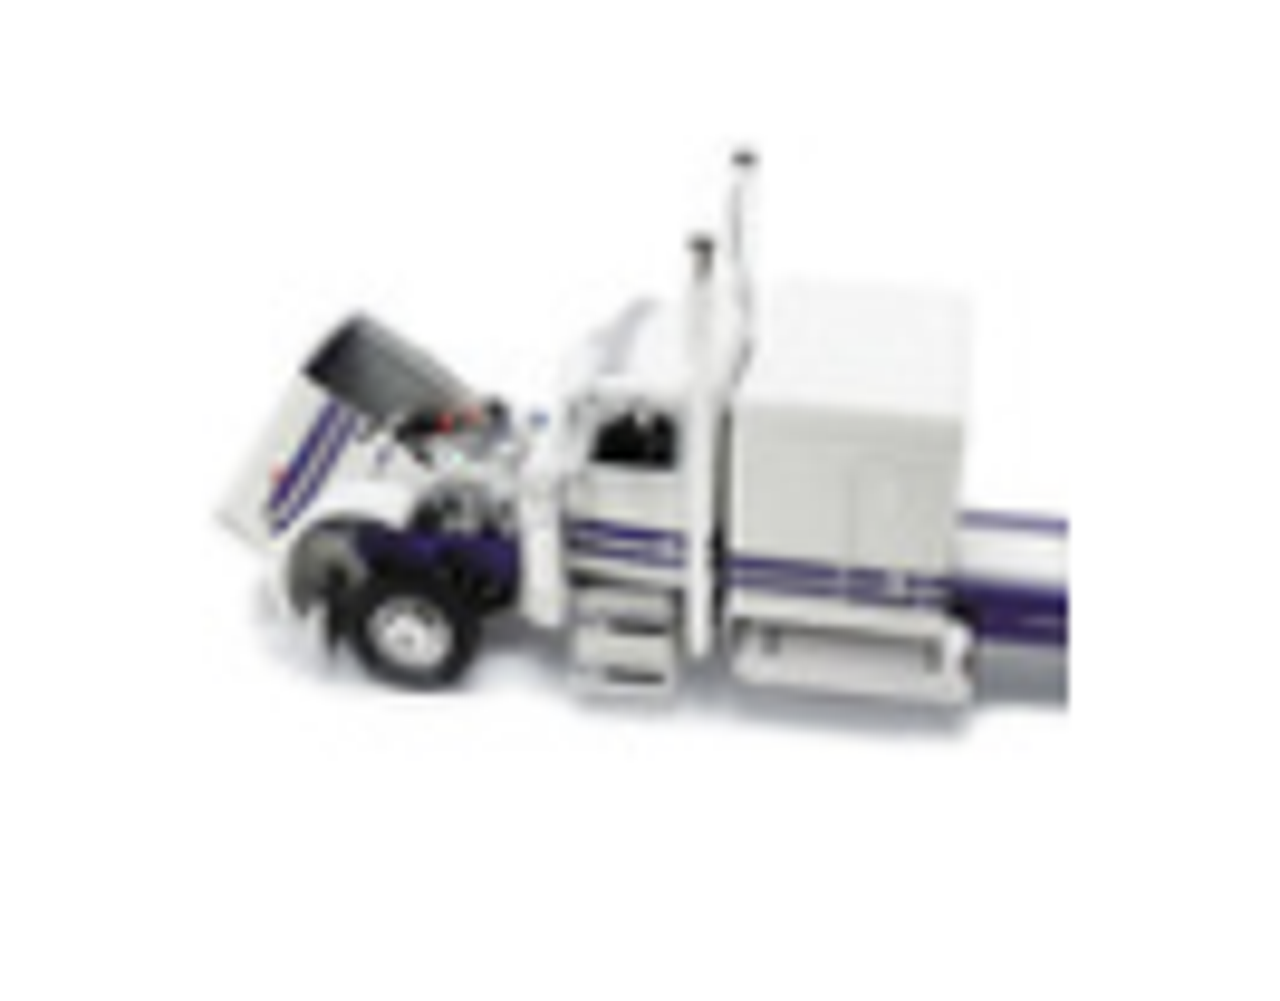 Peterbilt 389 with 63" Flat Top Sleeper Cab and Heil Fuel Tanker Trailer White with Purple Stripes "Preferred Materials Inc." 1/64 Diecast Model by DCP/First Gear